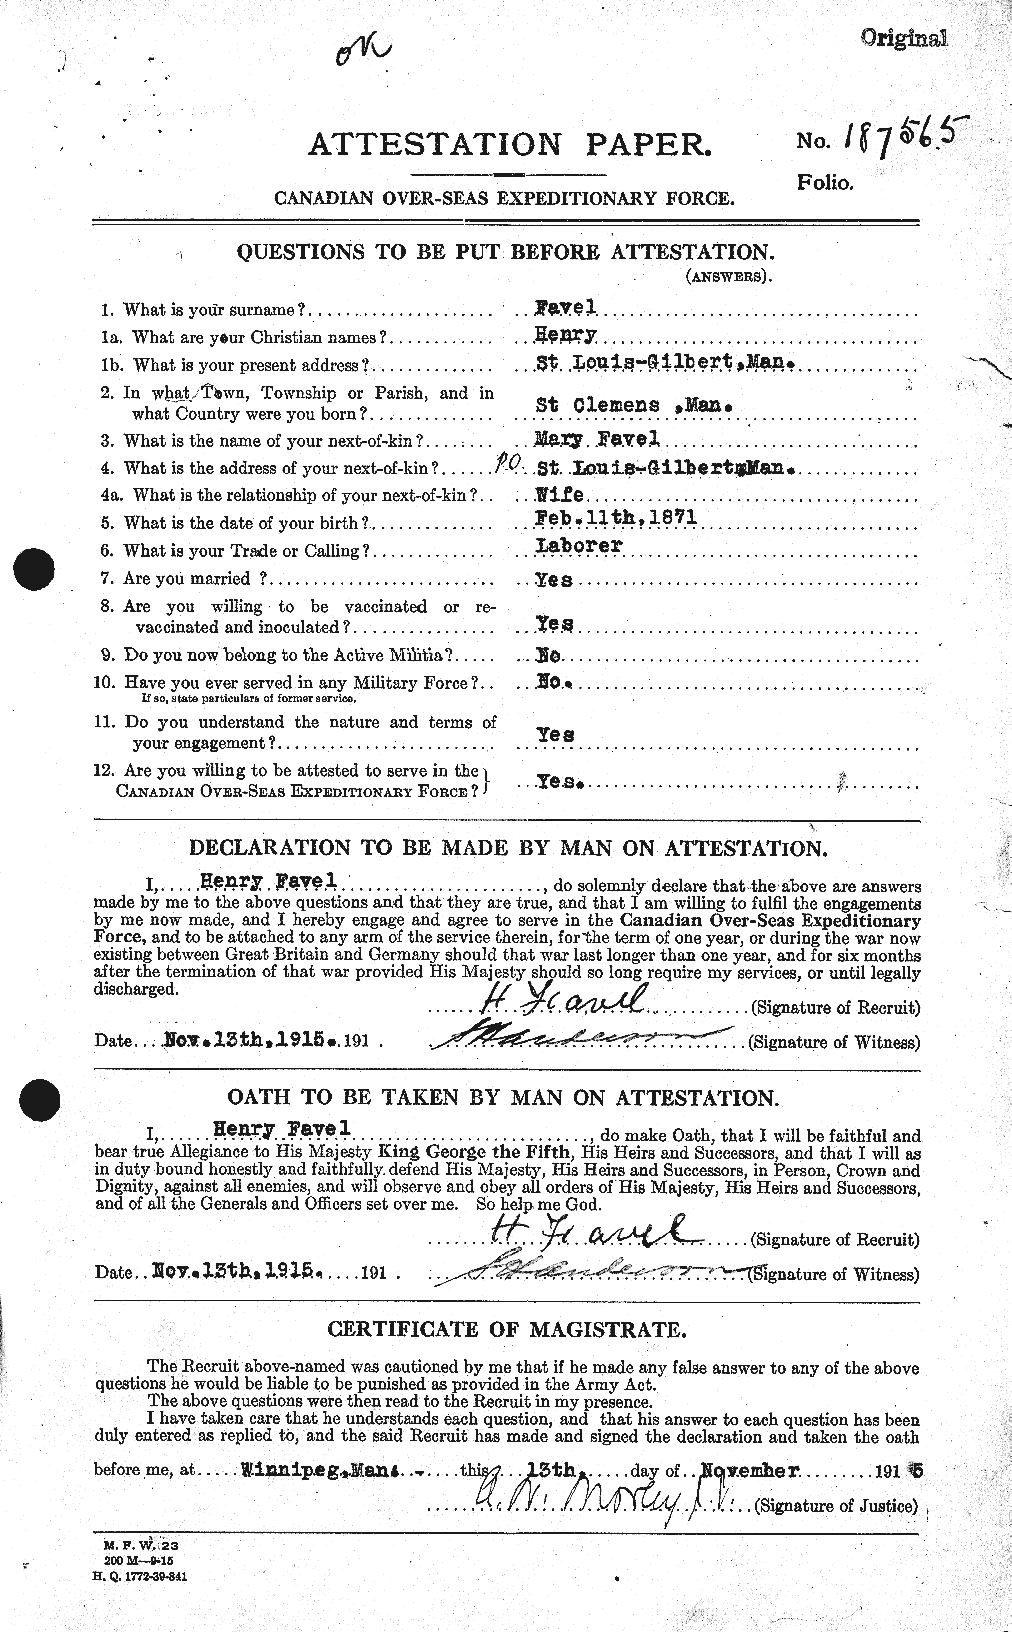 Personnel Records of the First World War - CEF 321411a